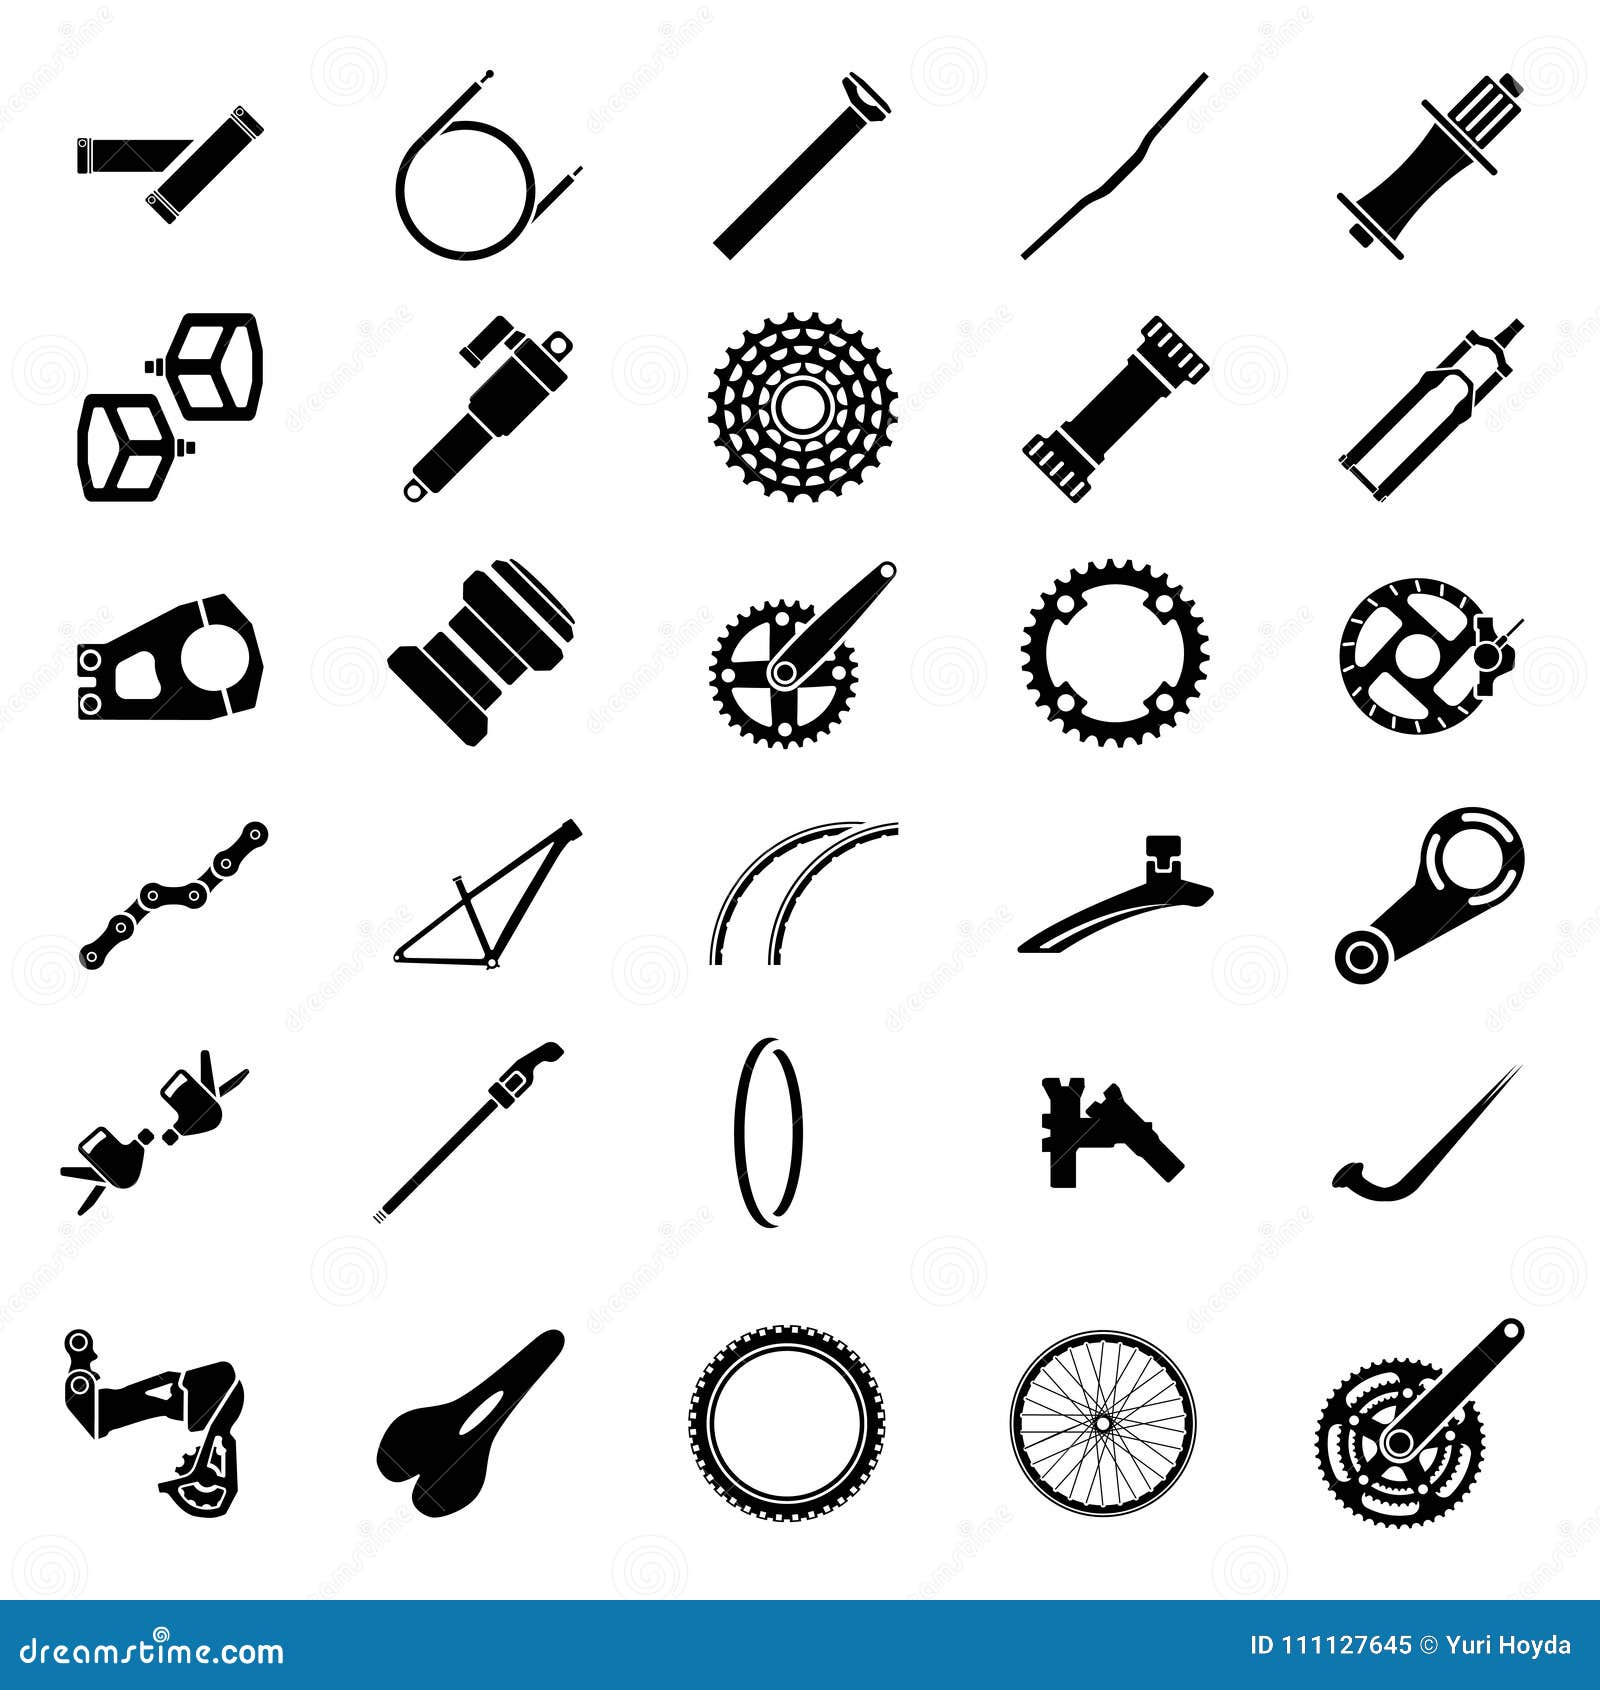 fresh bicycle part icons pack. icon of bicycle component.mountain bike parts.  ilustration.